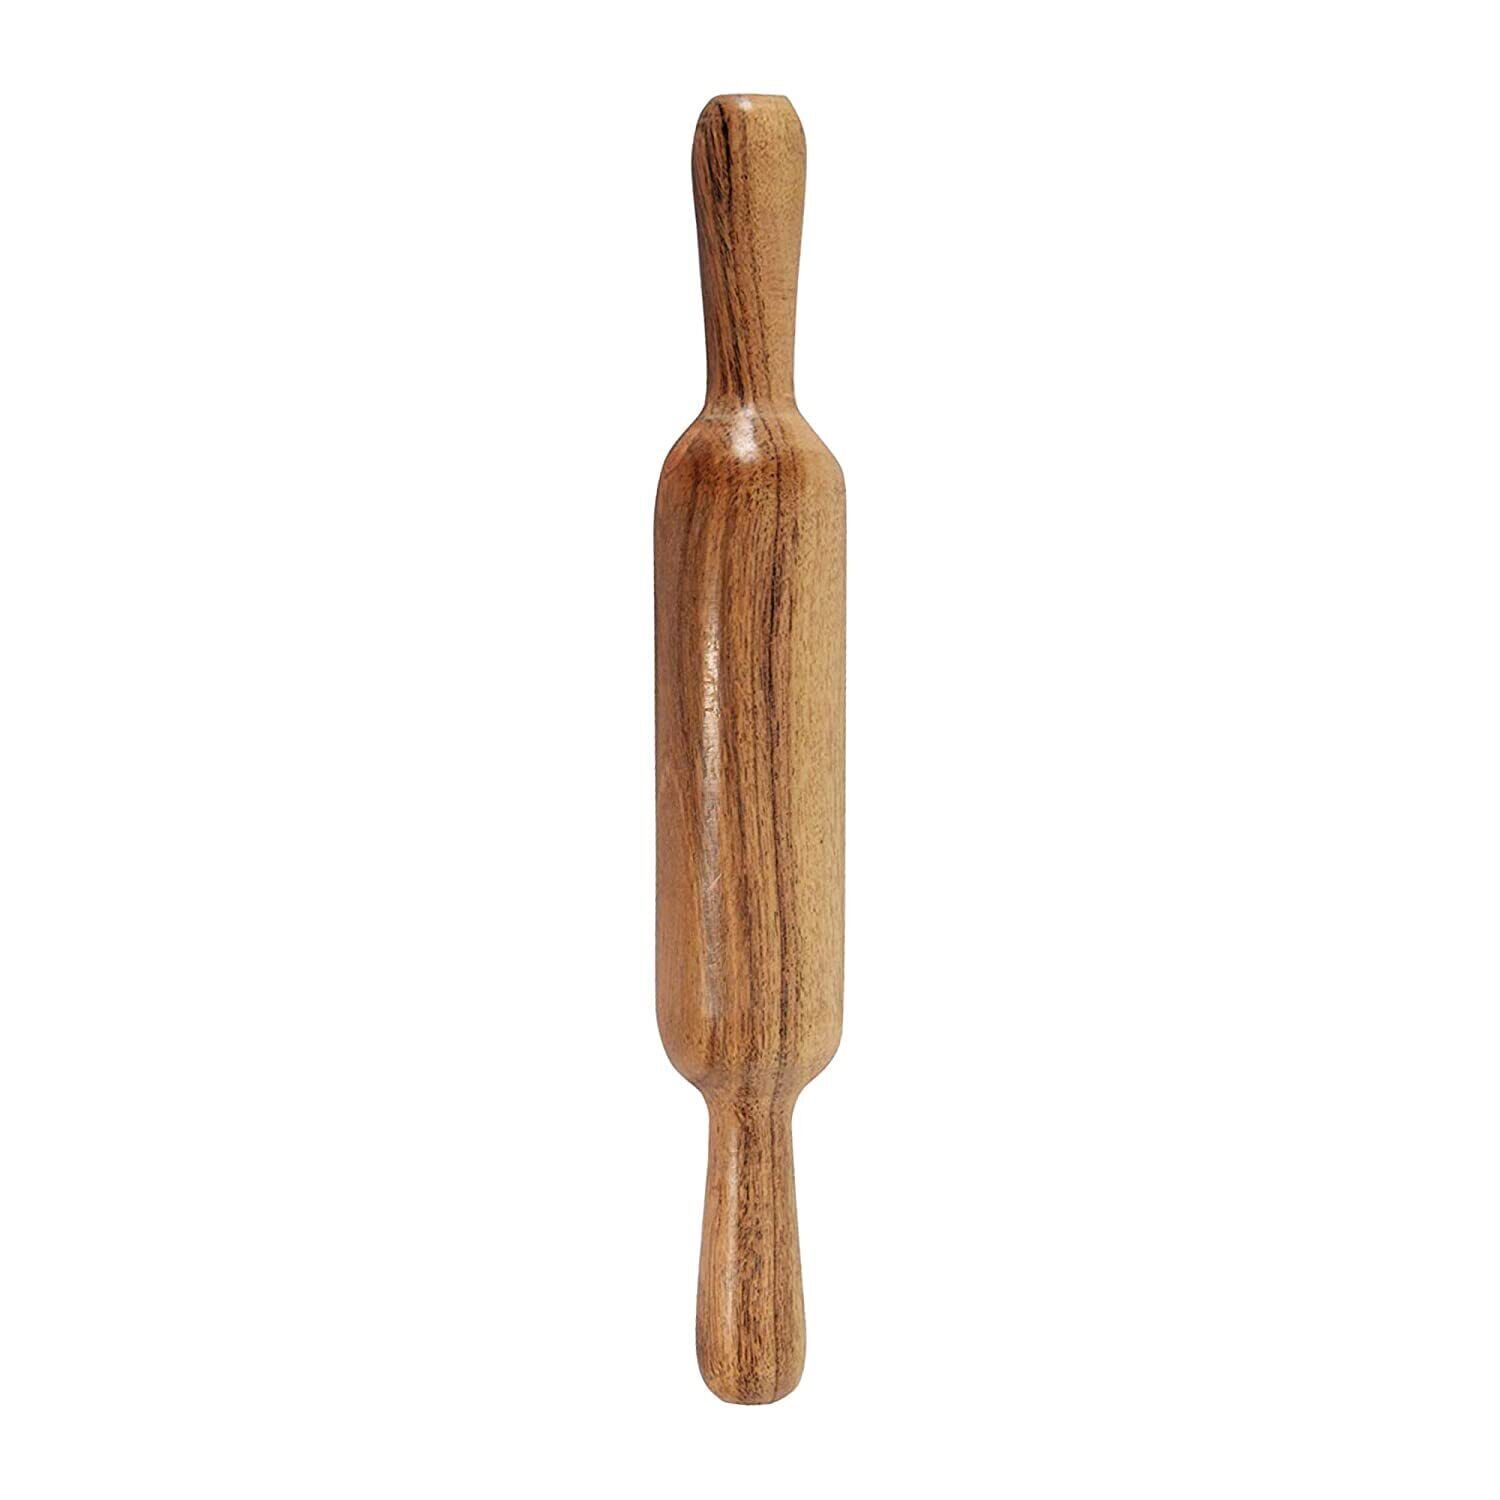 Wooden Handmade 9 Inch Belan Maker For Chapati Roti For Home Use